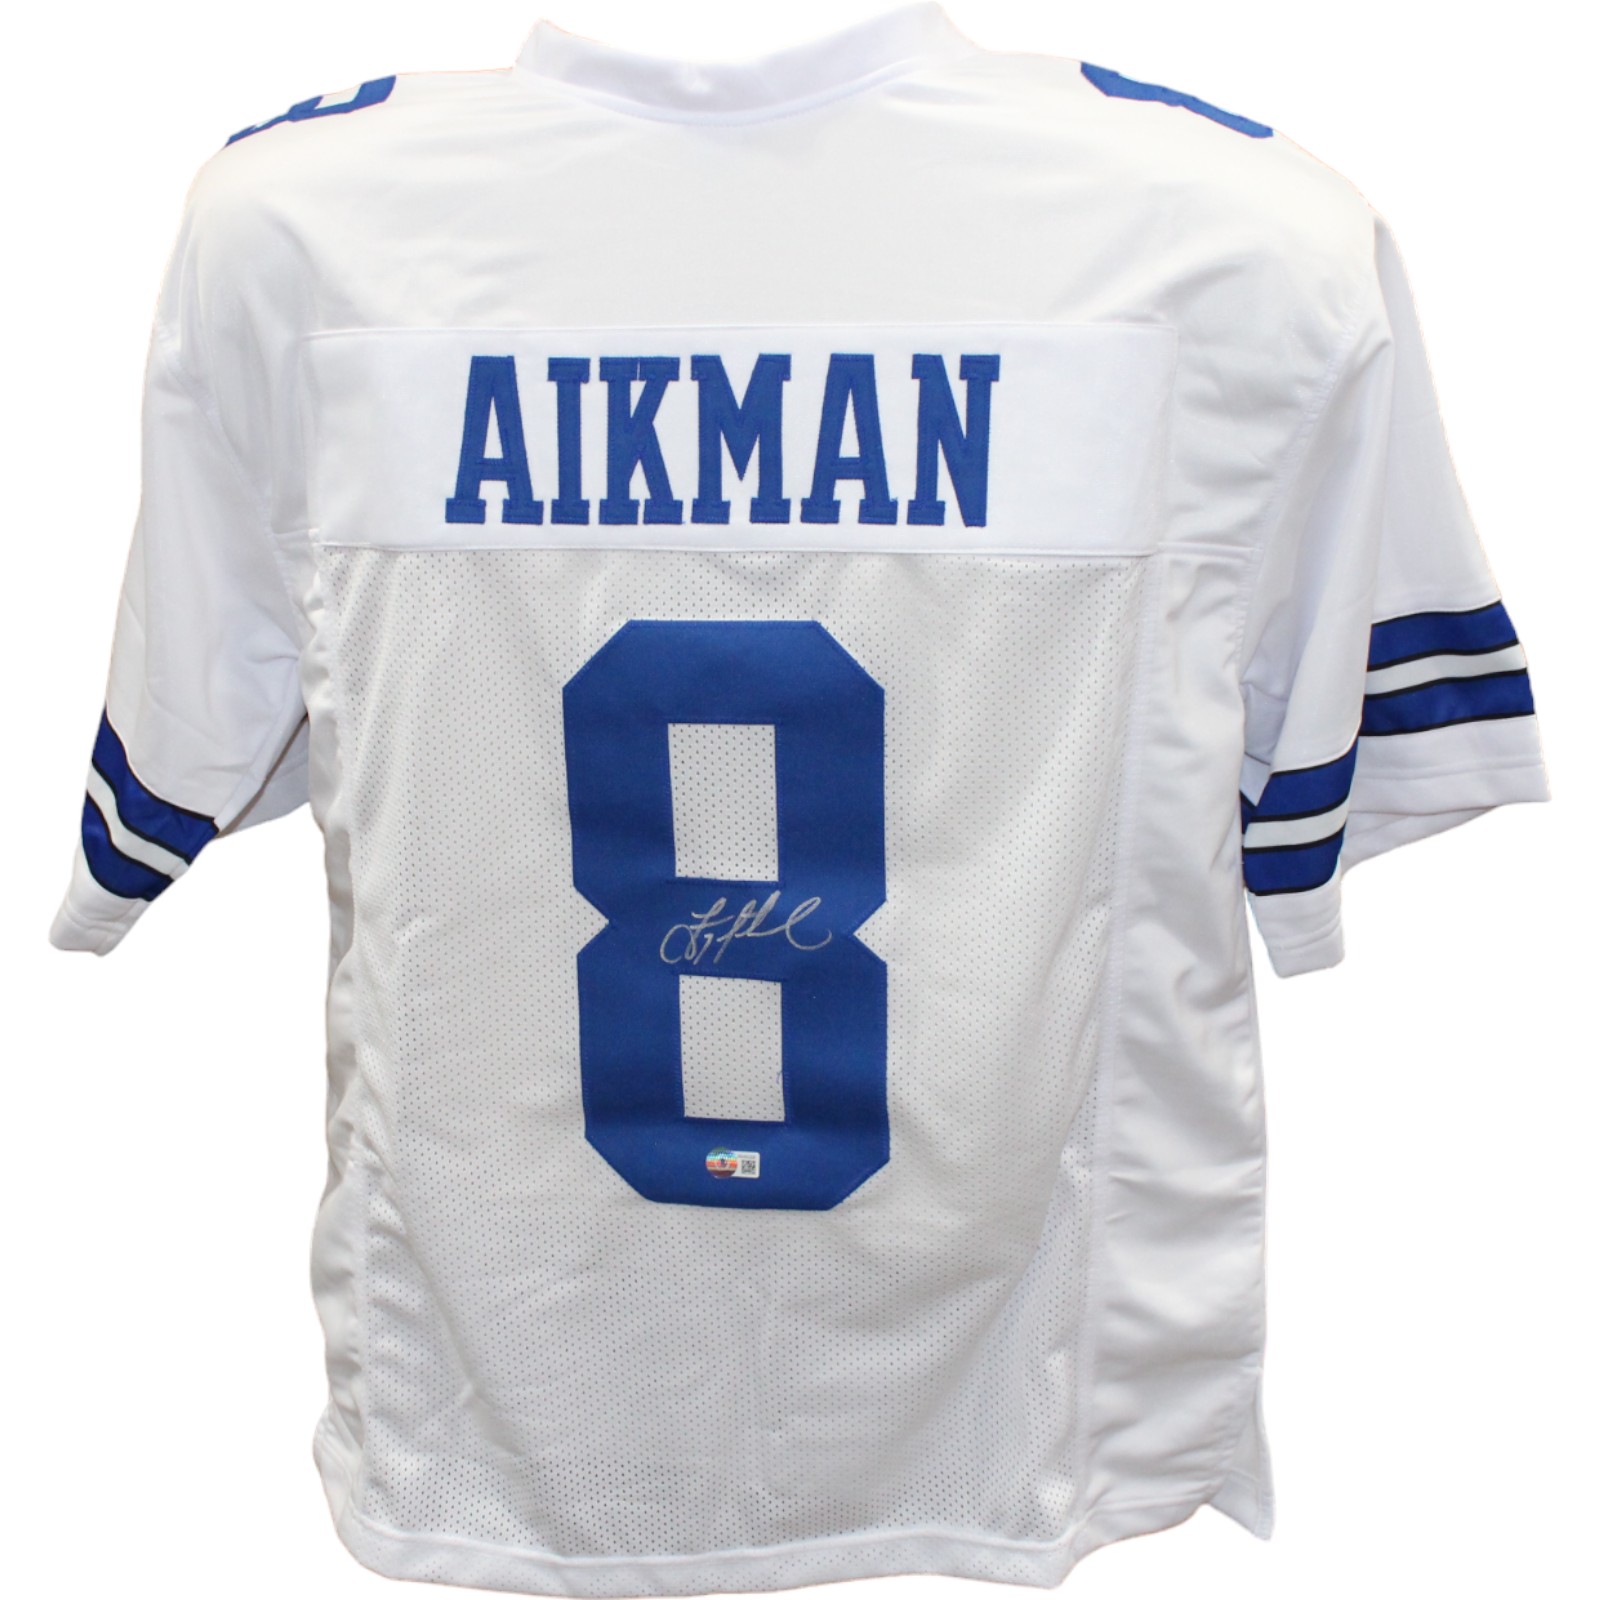 Troy Aikman Autographed/Signed Pro Style White Jersey Beckett